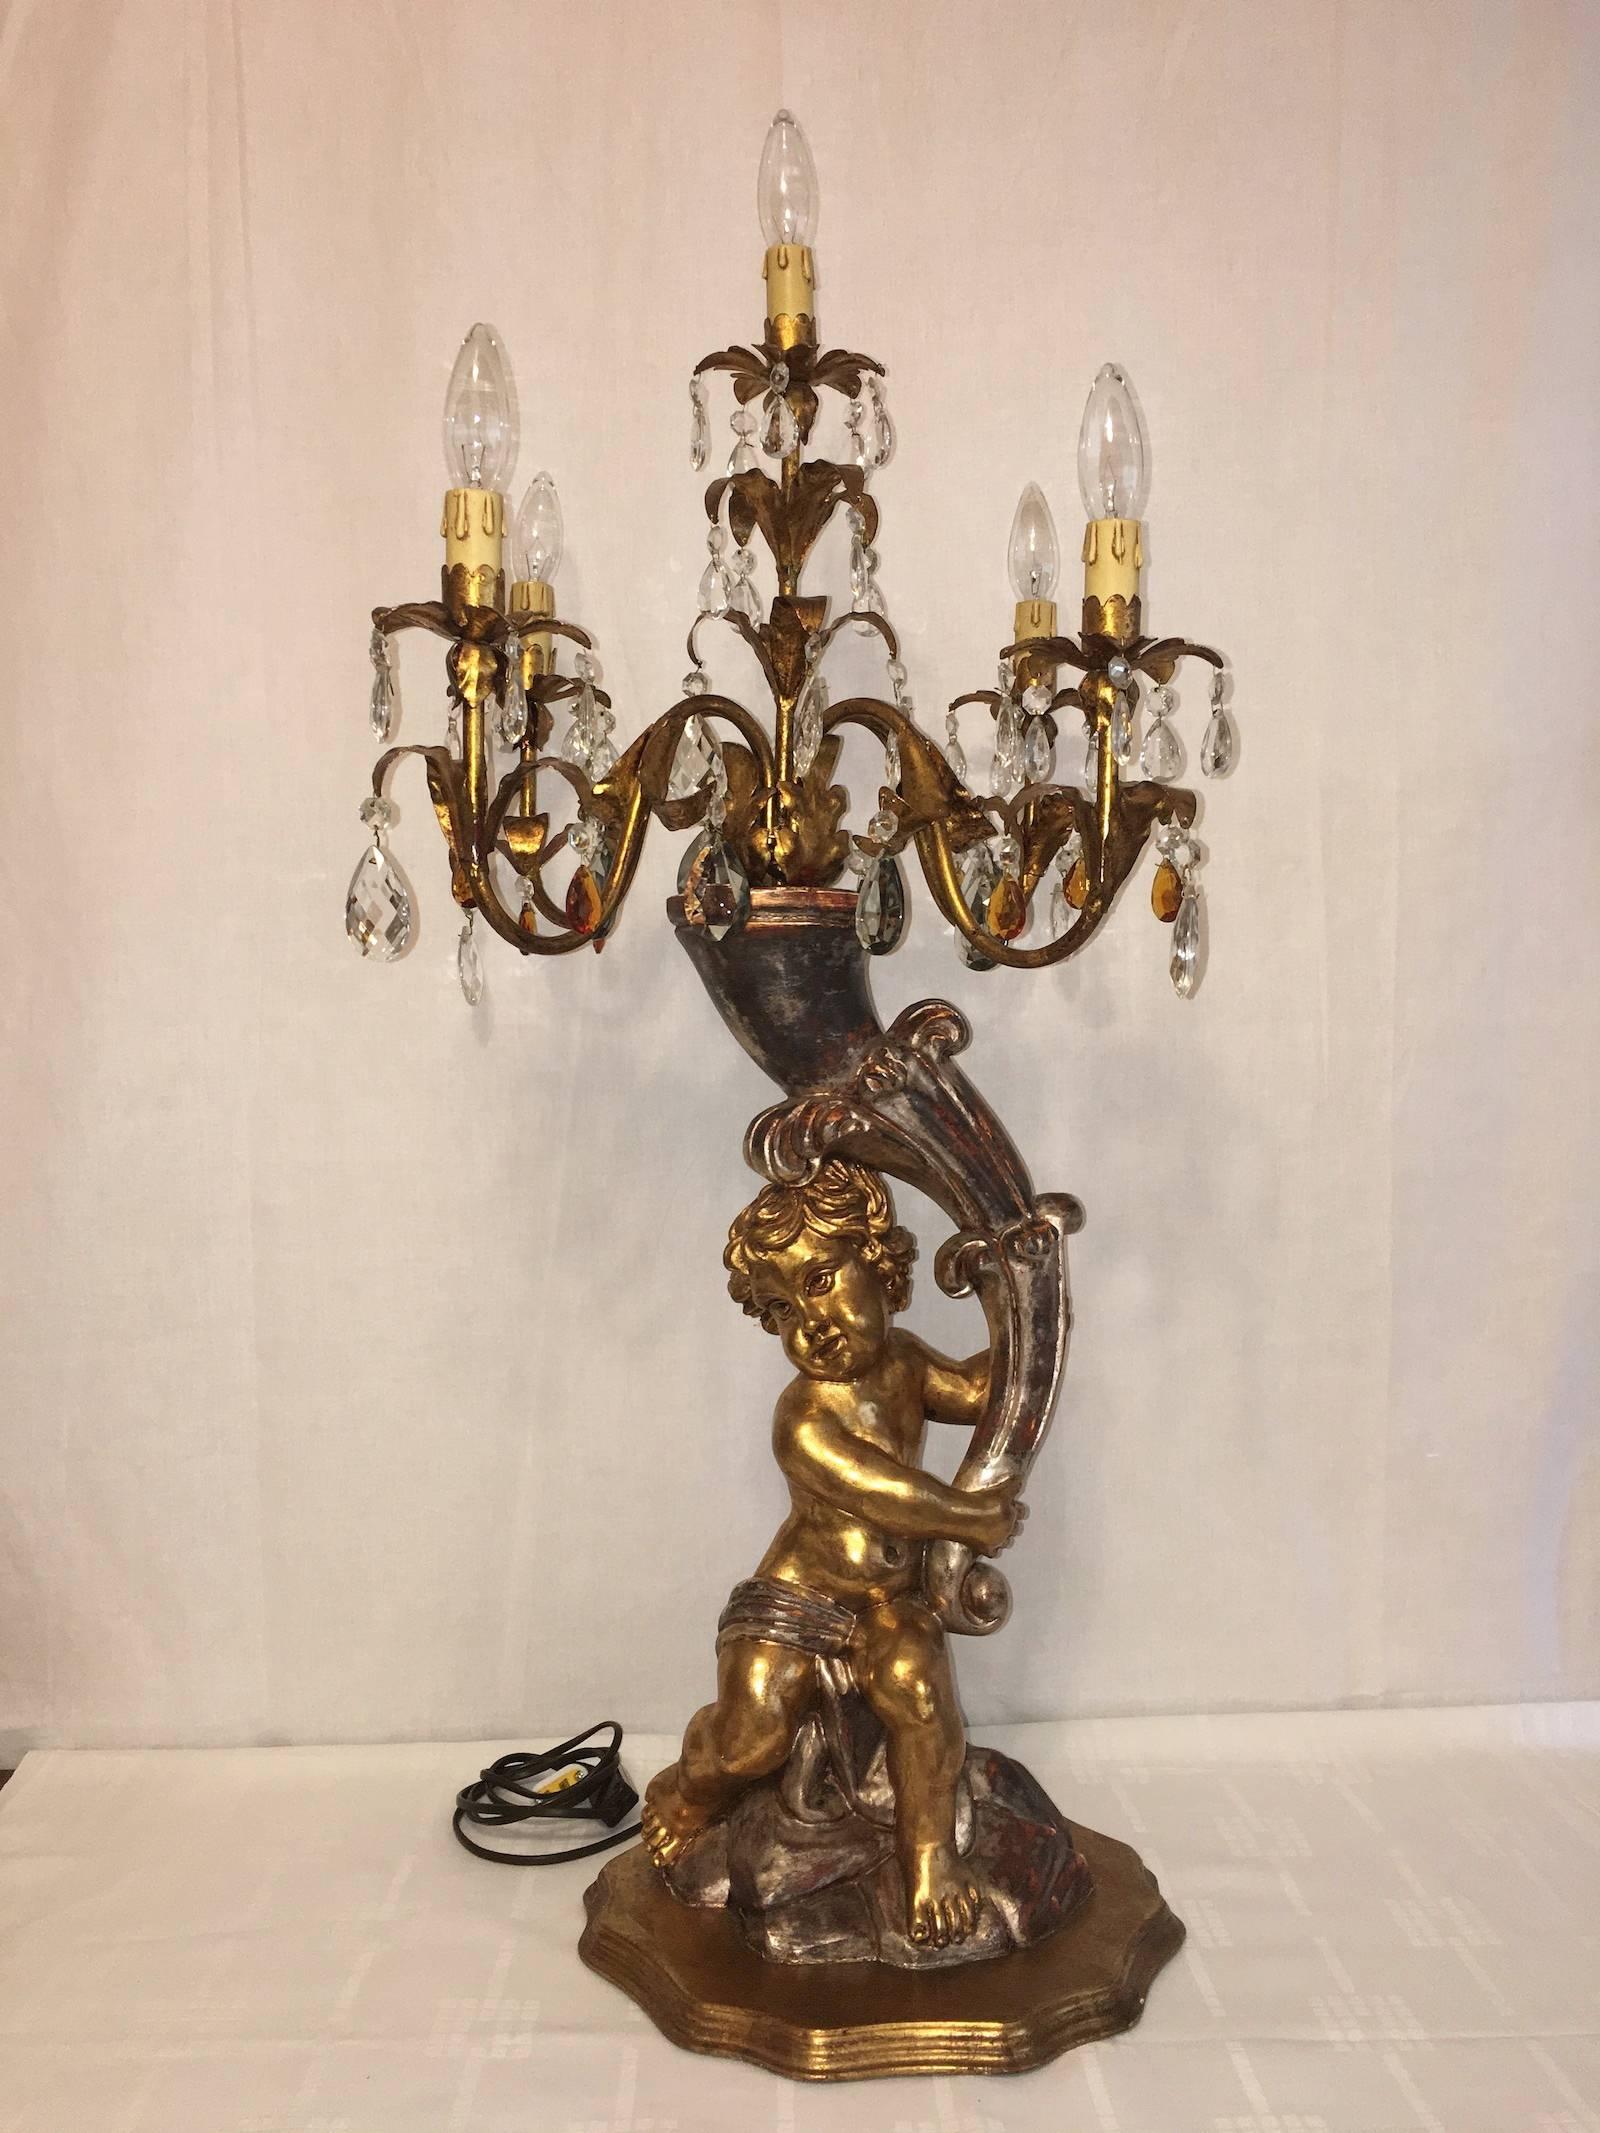 Beautiful wooden, crystal prism and gilded metal, large cherub figure table lamp. Can be used with E 14 candelabra bulbs or converters. Measure: It is approximate 20